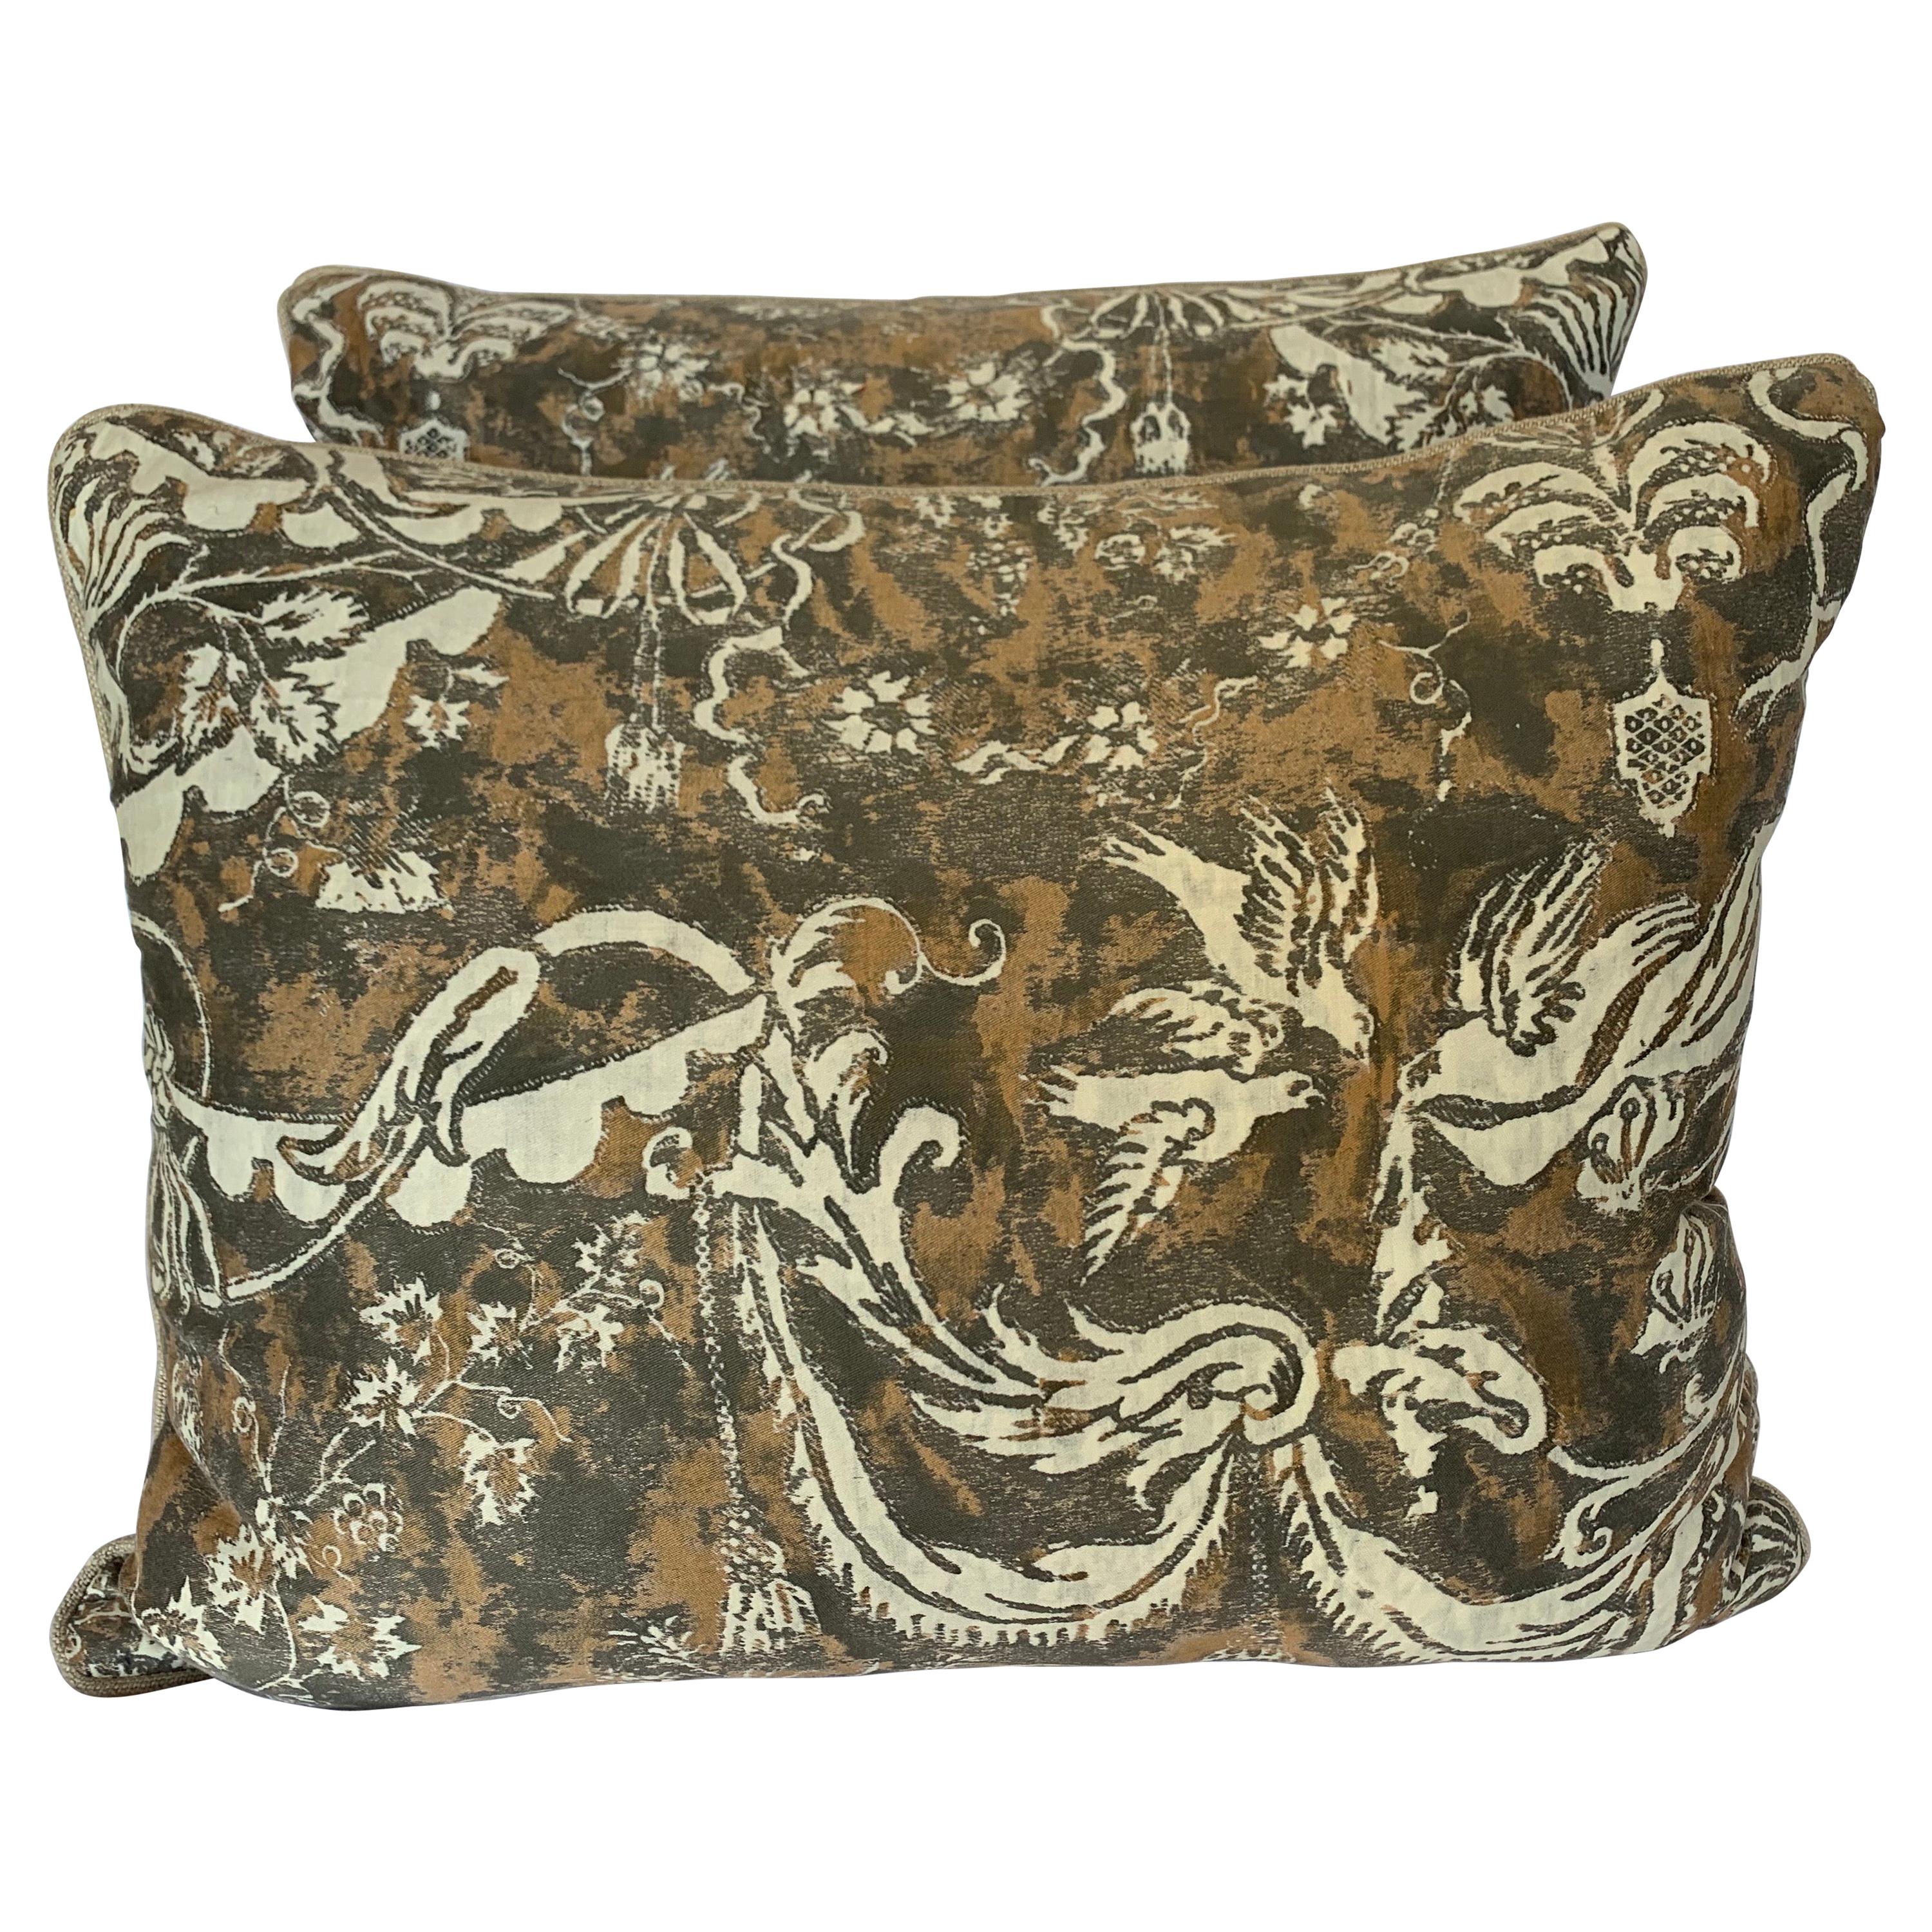 Pair of Unique Fortuny Pillows w/ Birds & Garlands